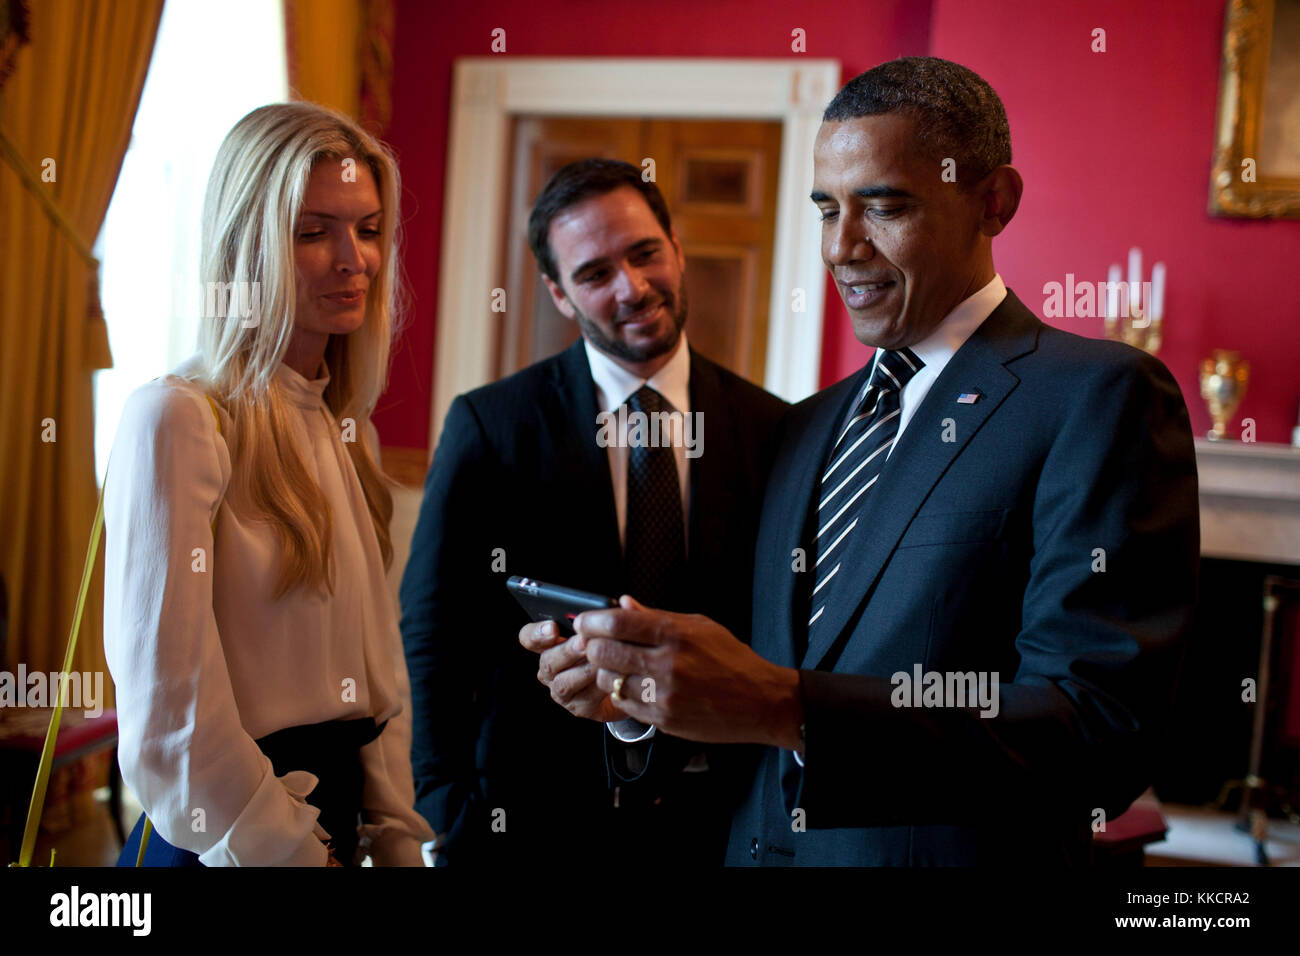 President Barack Obama visits with 2010 NASCAR Champion Jimmie Johnson and his wife, Chandra, in the Red Room of the White House before a ceremony to honor Johnson’s NASCAR Sprint Cup Series Championship, Sept. 7, 2011. Stock Photo